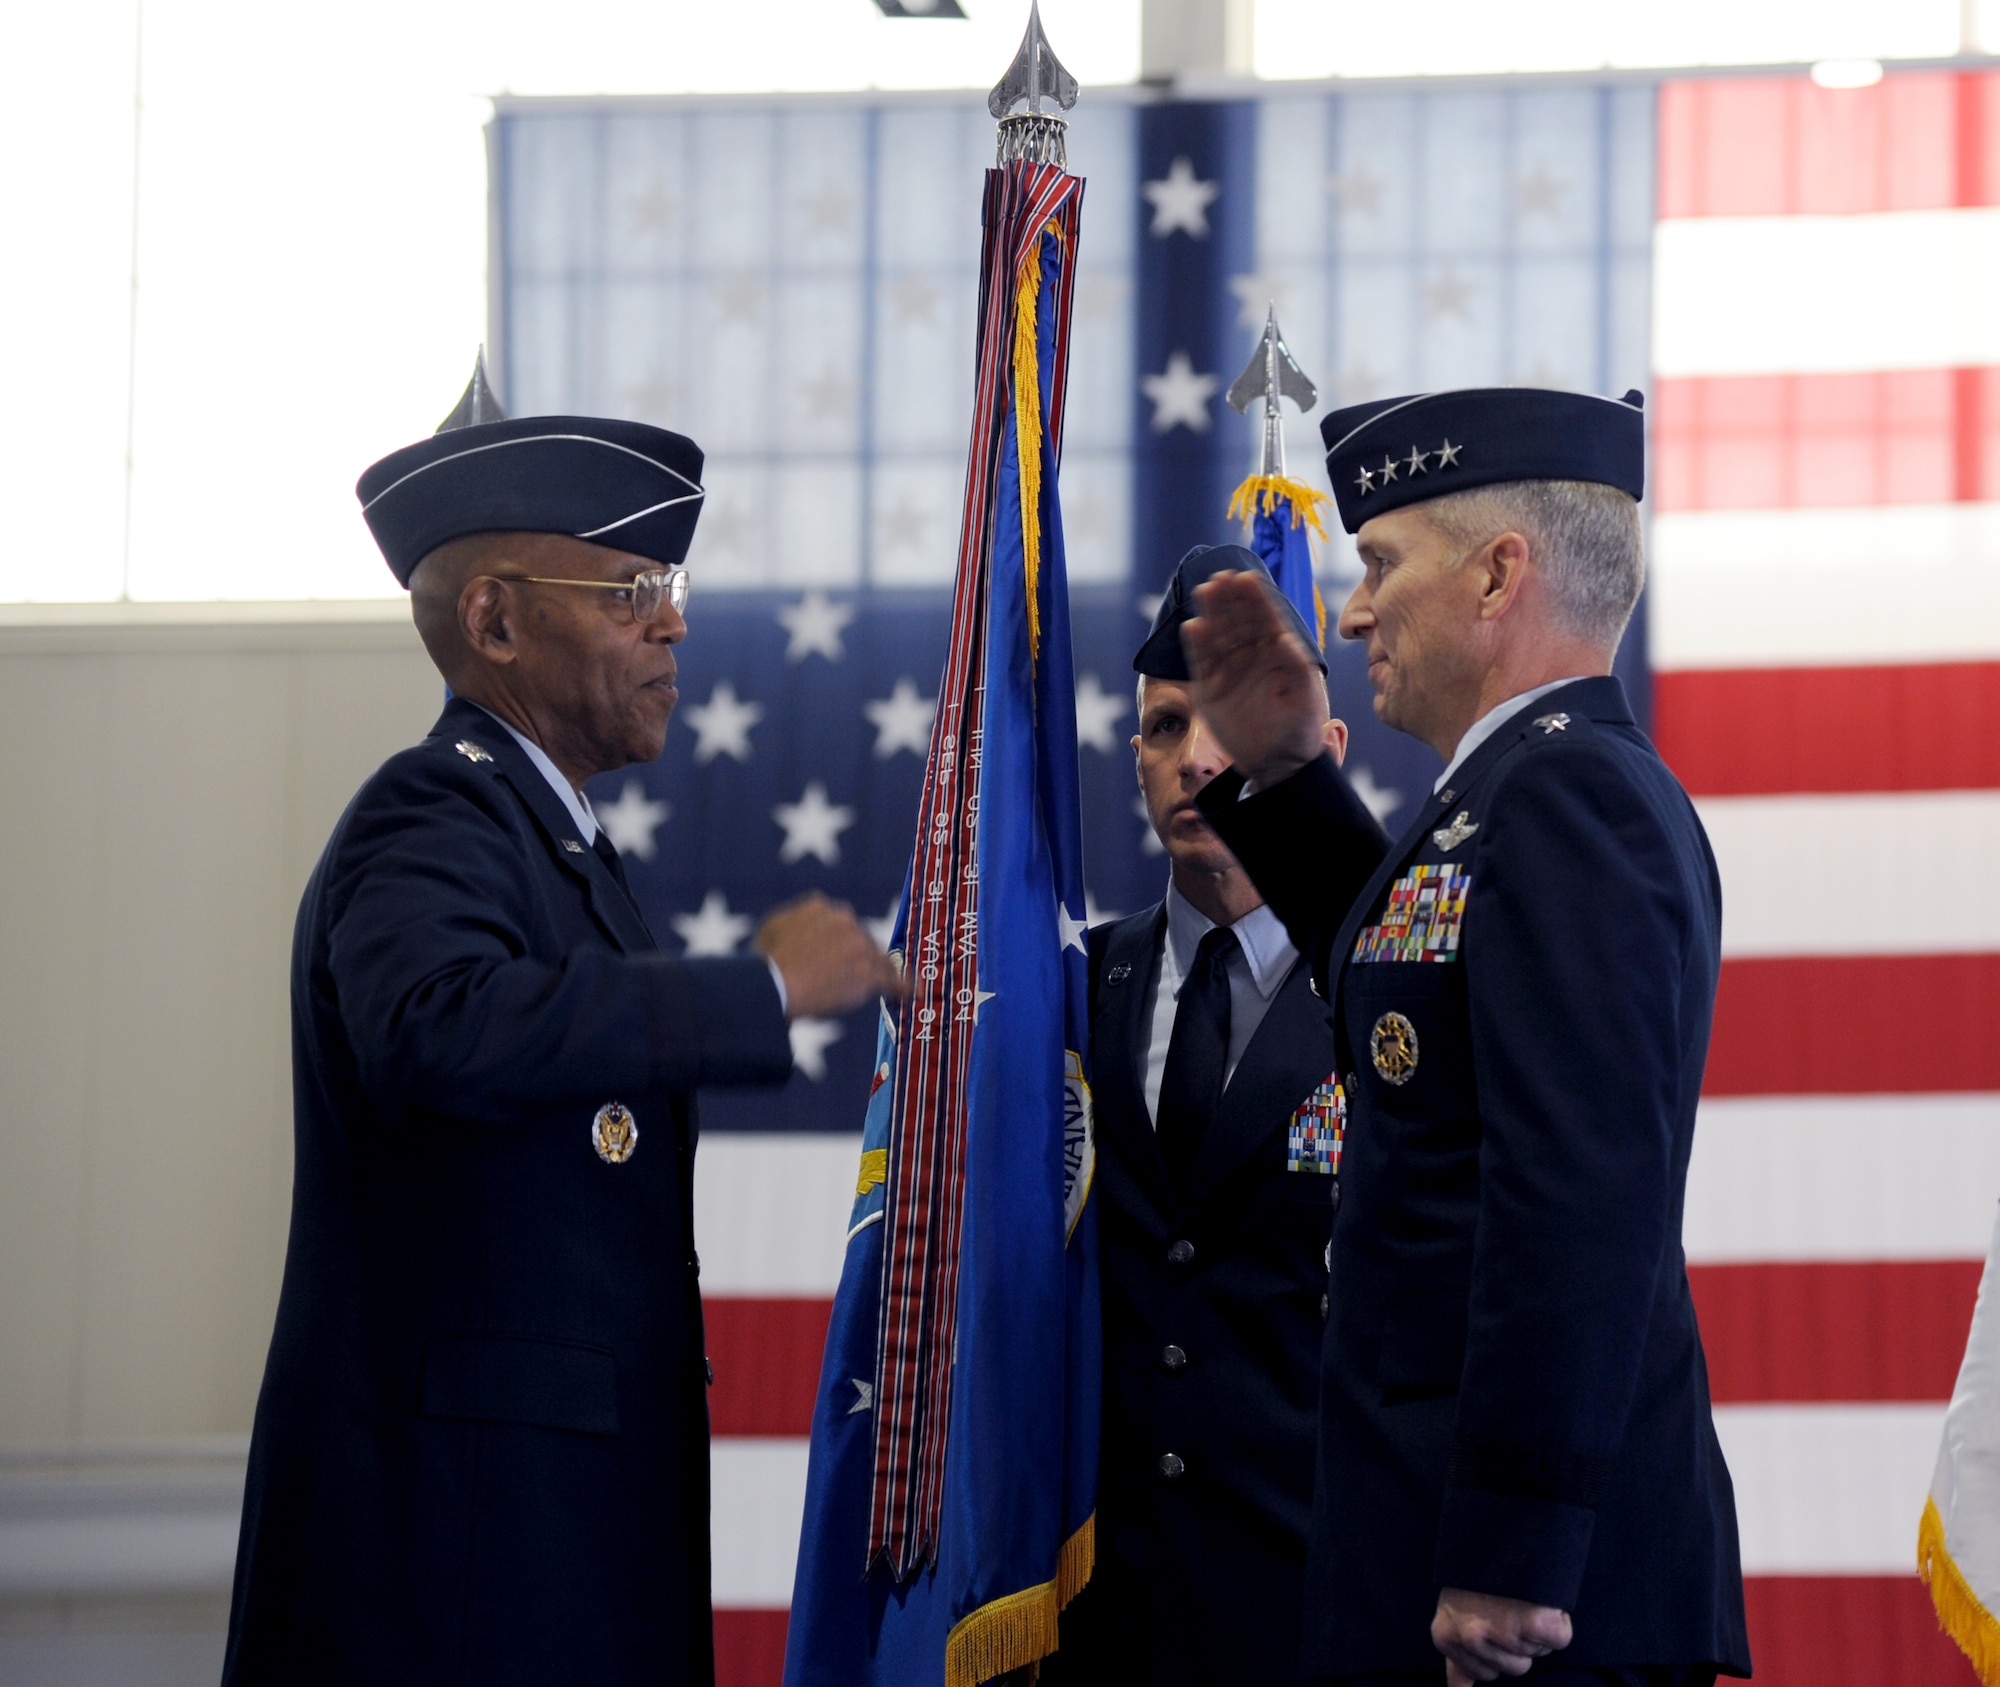 U.S. Air Force Gen. Mike Hostage renders one of his final salutes as commander of Air Combat Command to U.S. Air Force Vice Chief of Staff Gen. Larry O. Spencer during the change of command ceremony at Langley Air Force Base, Va., Nov. 4, 2014. Hostage also retired after 37 years of service in the Air Force. (U.S. Air Force photo by Staff Sgt. Candice Page/Released)